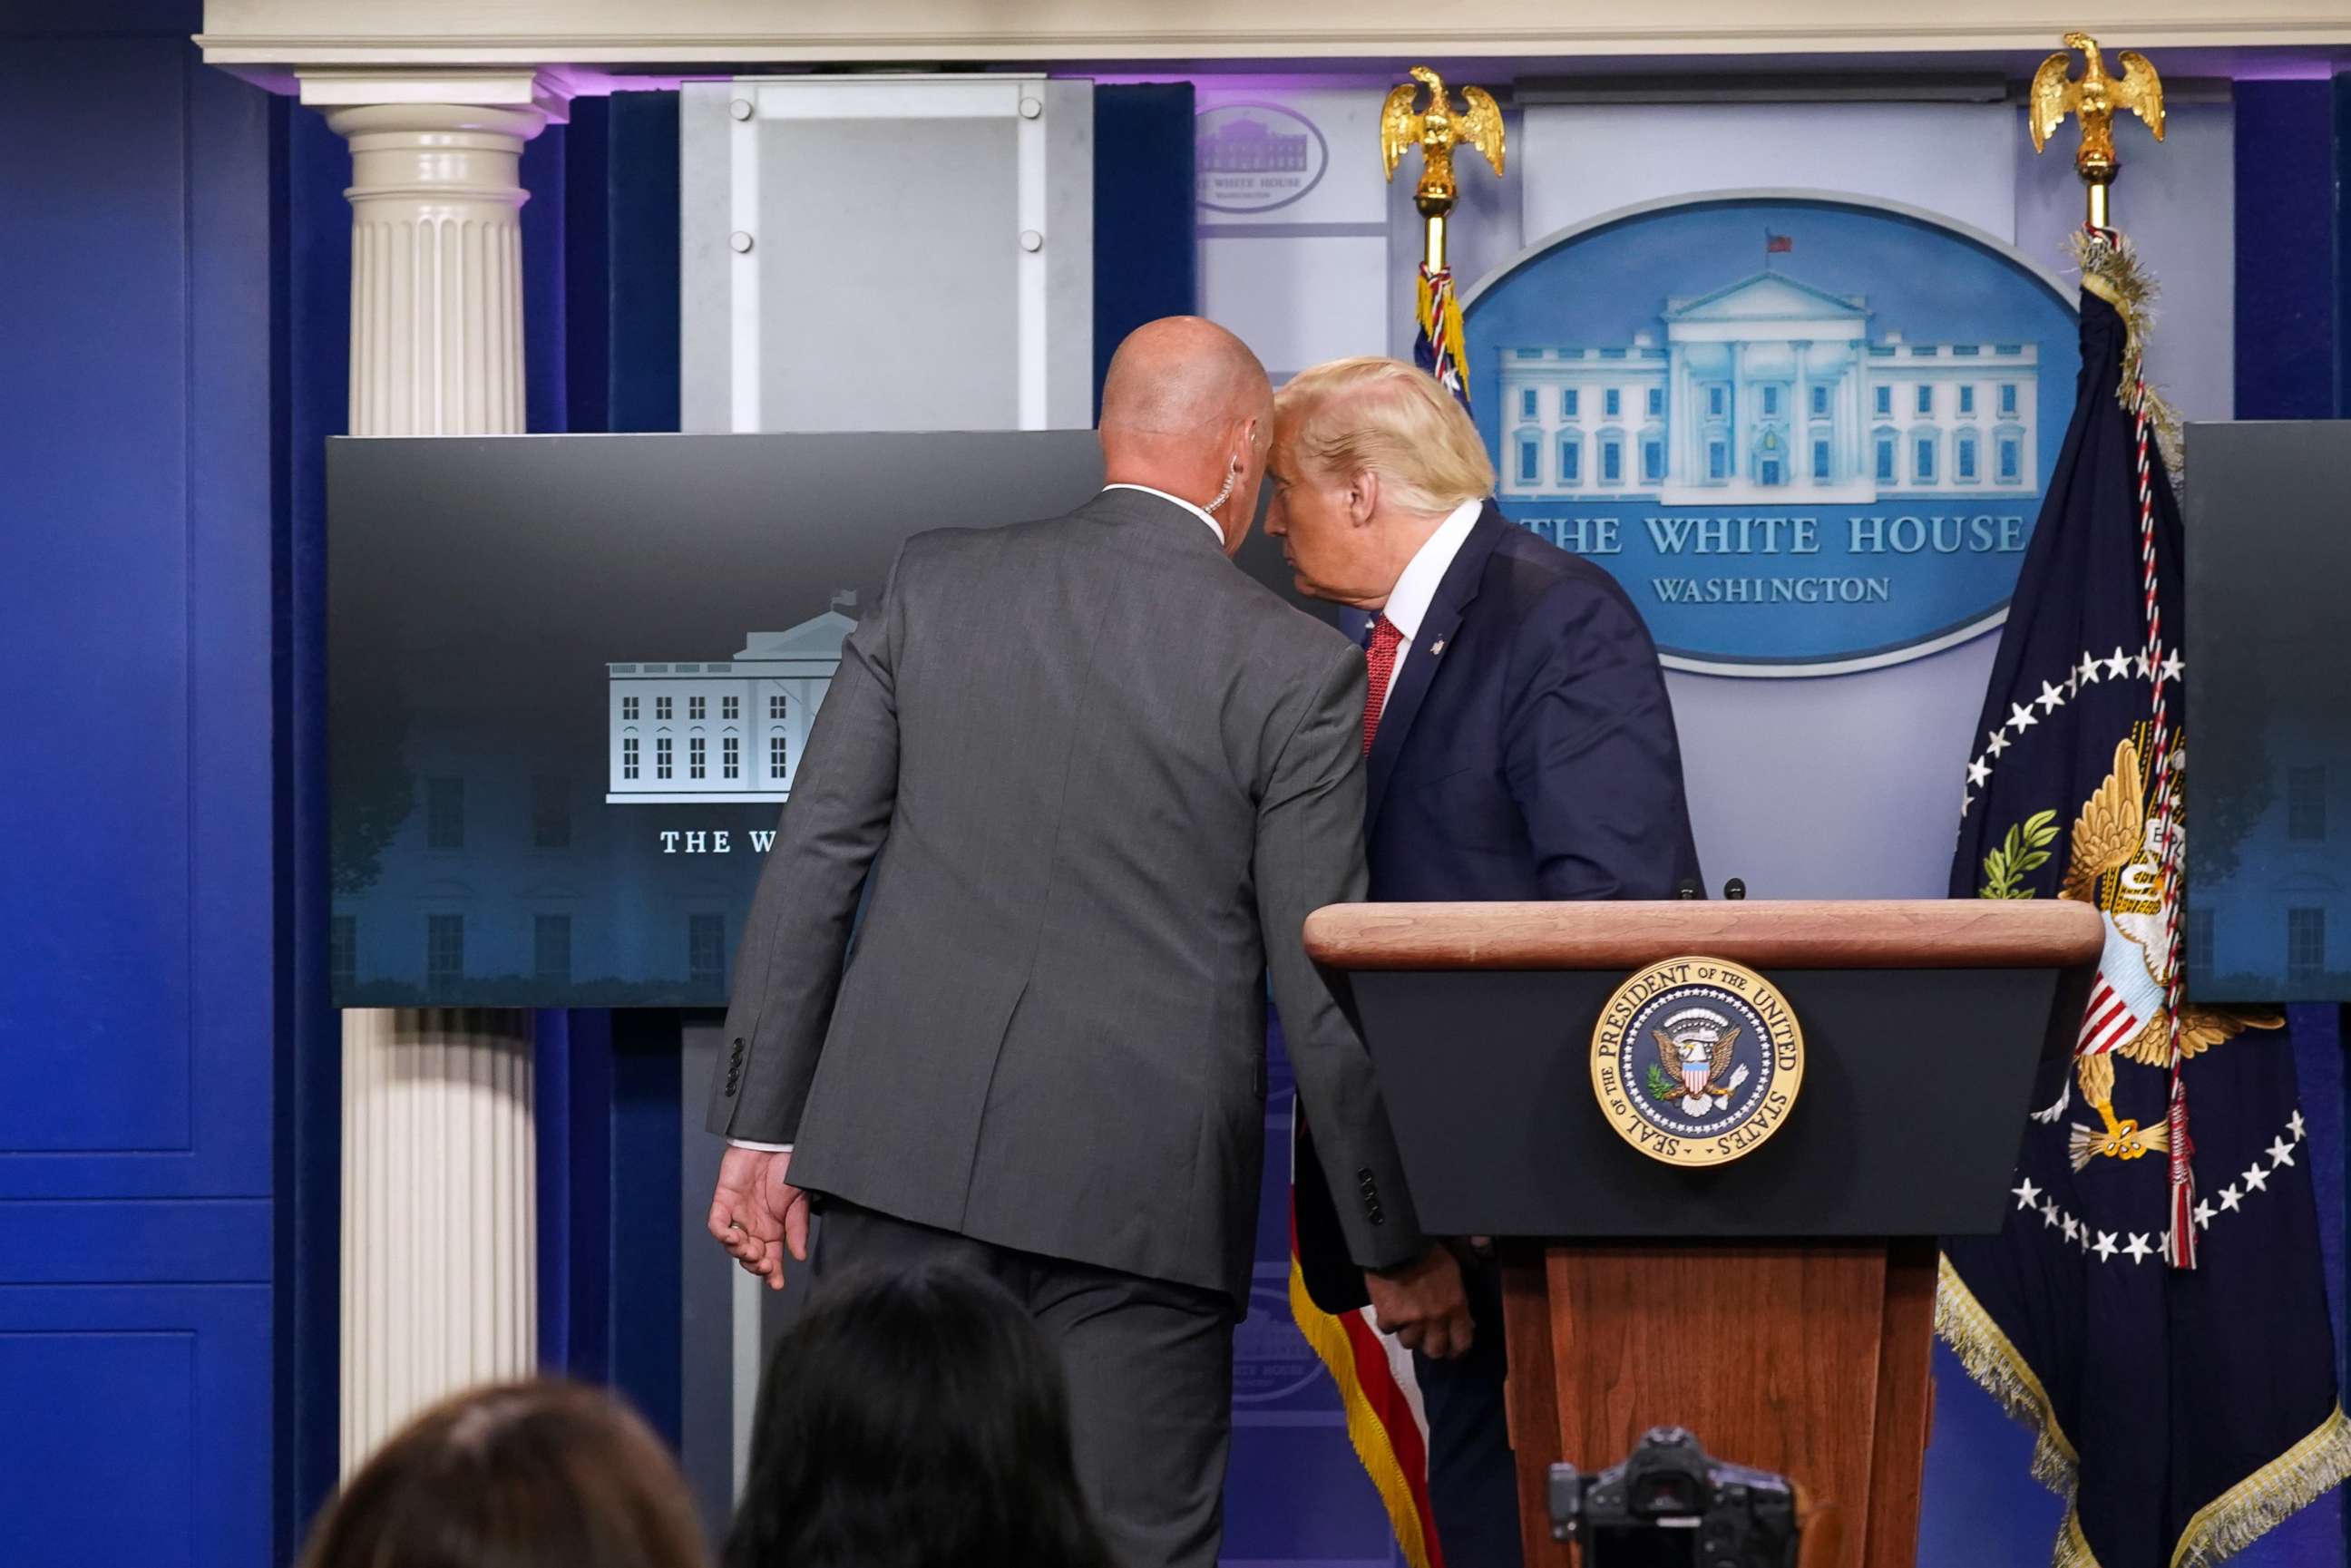 PHOTO: A member of the secret service whispers to President Donald Trump before escorting him from briefing at the White House, Aug. 10, 2020.